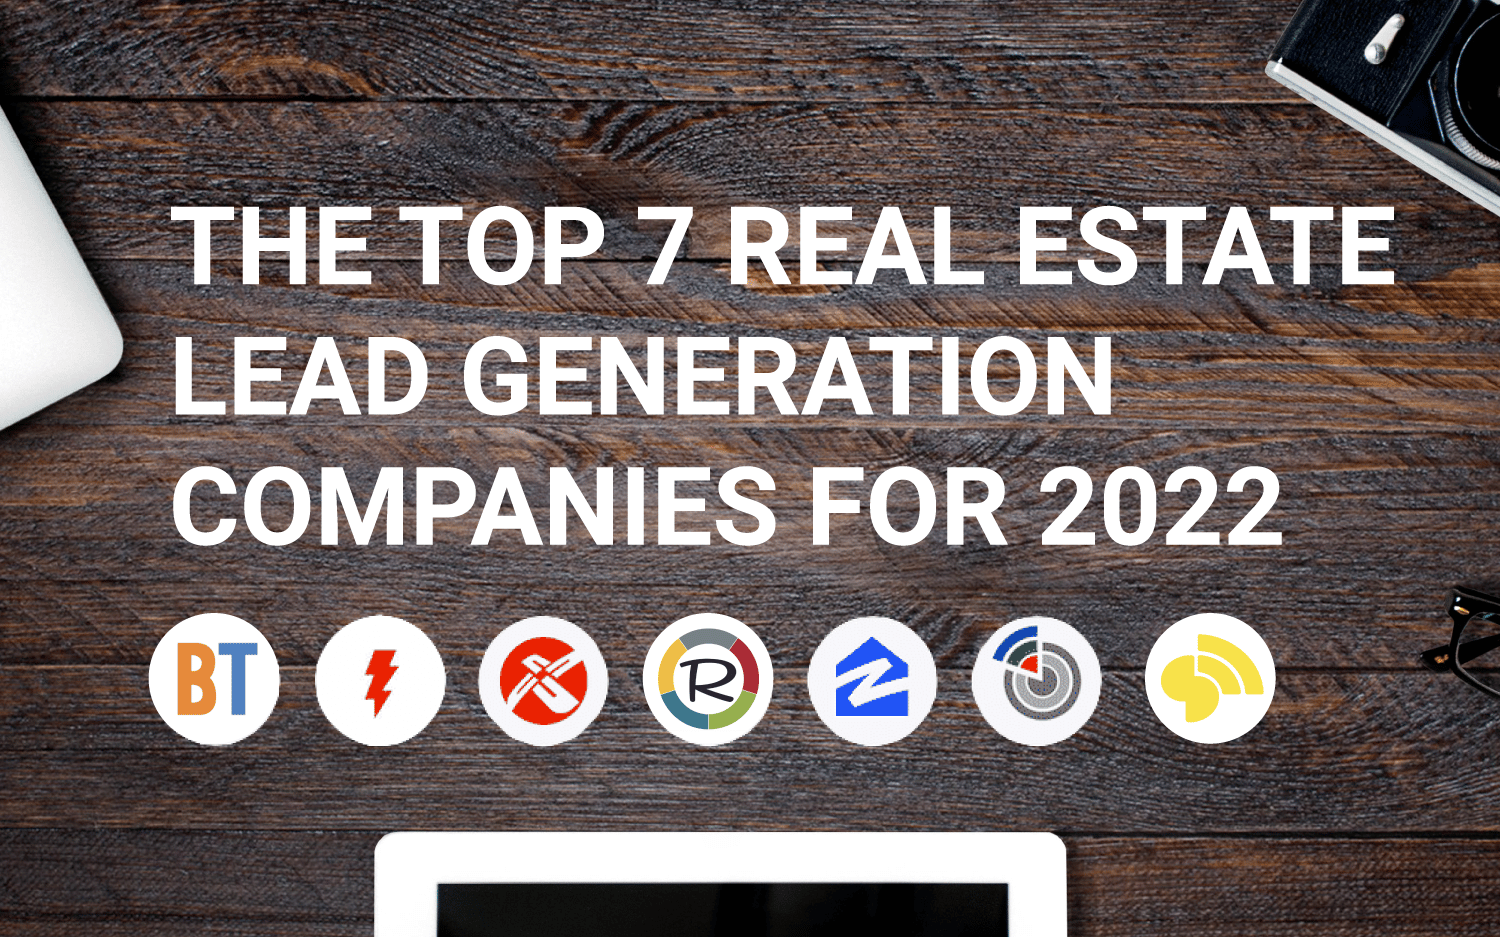 The Top 7 Real Estate Lead Generation Companies for 2022 (+ 3 to Avoid)